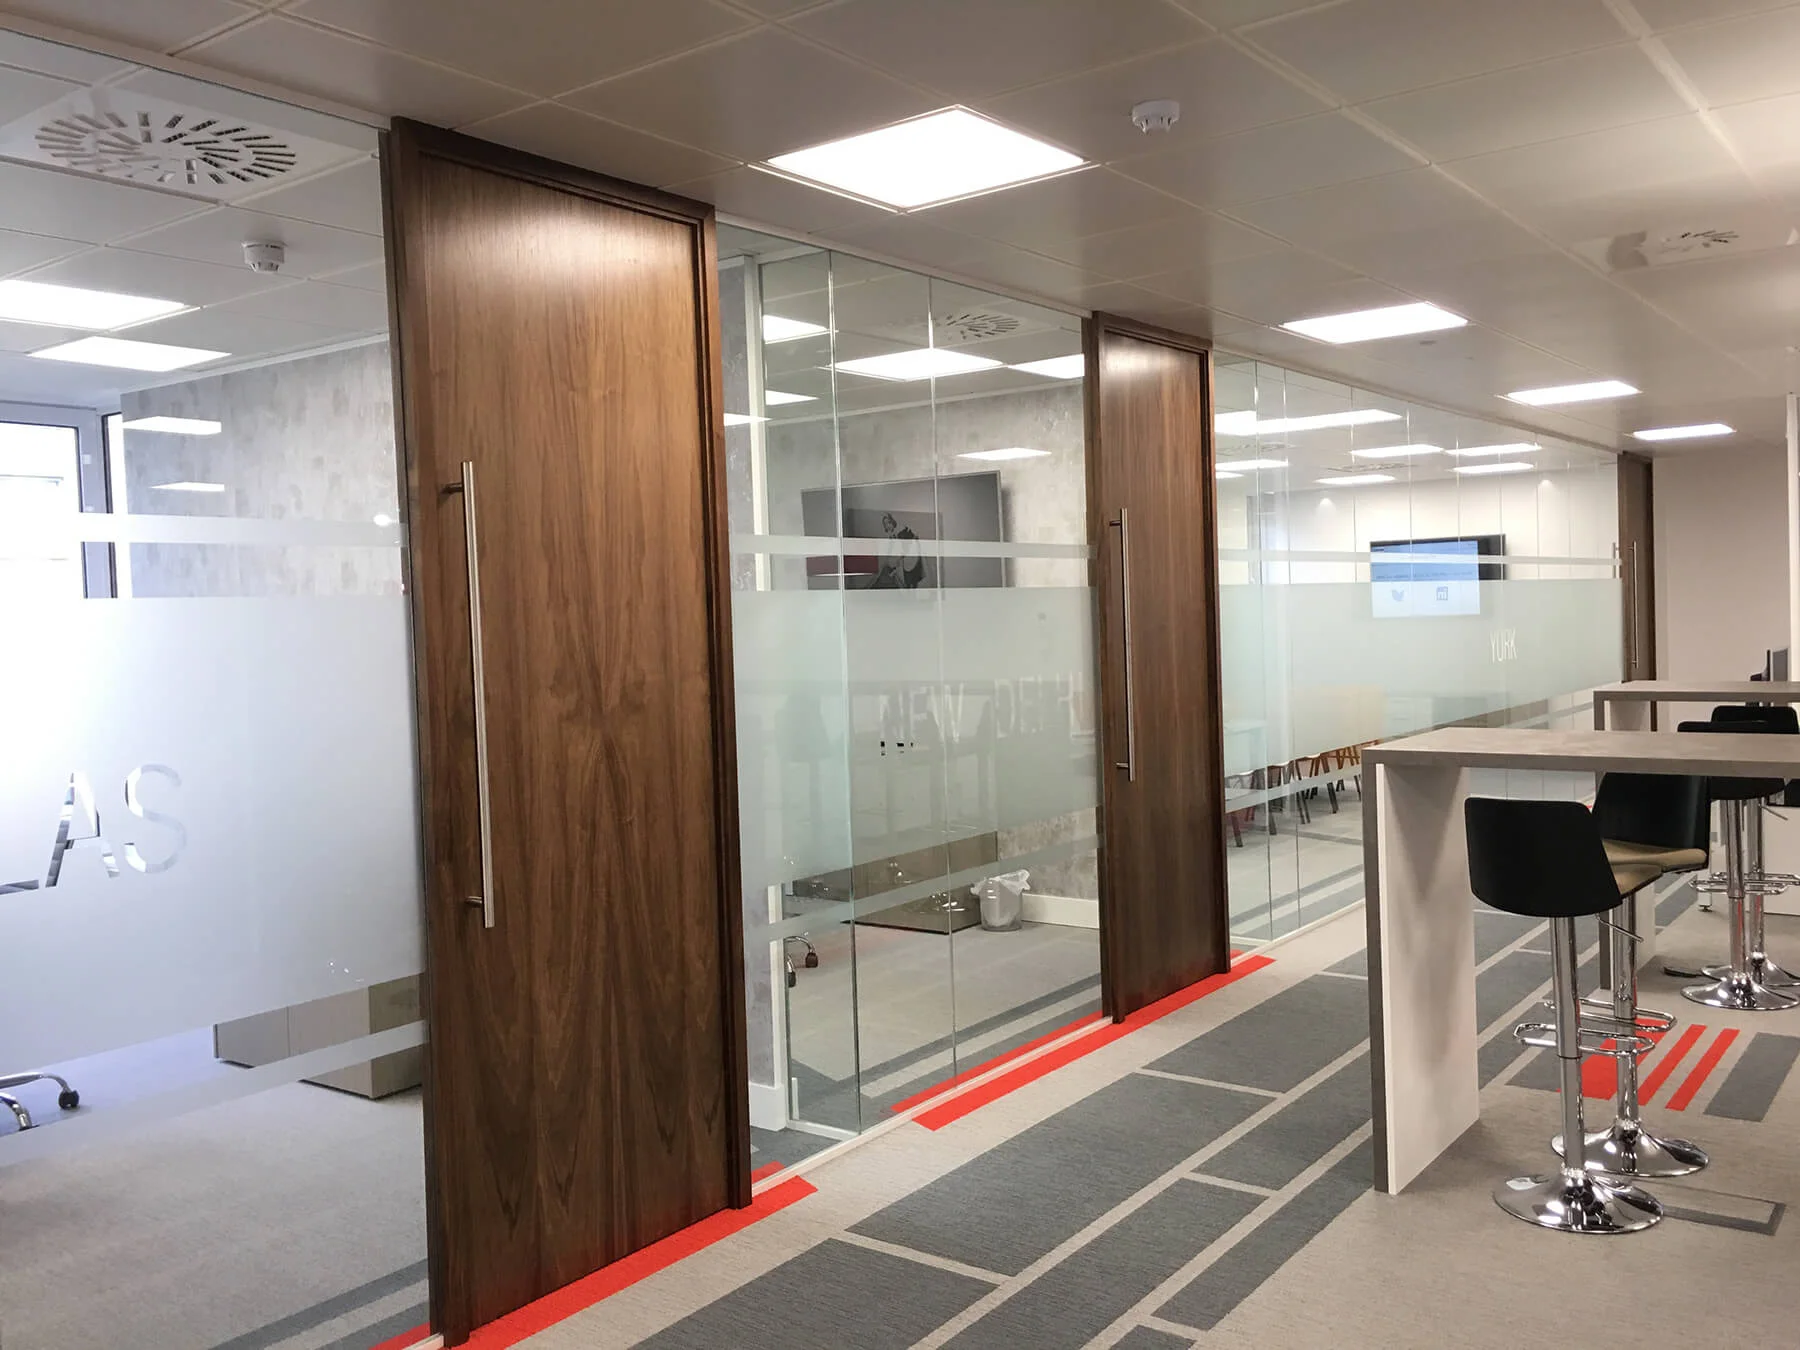 Glass partitions with high solid bands and wood doors